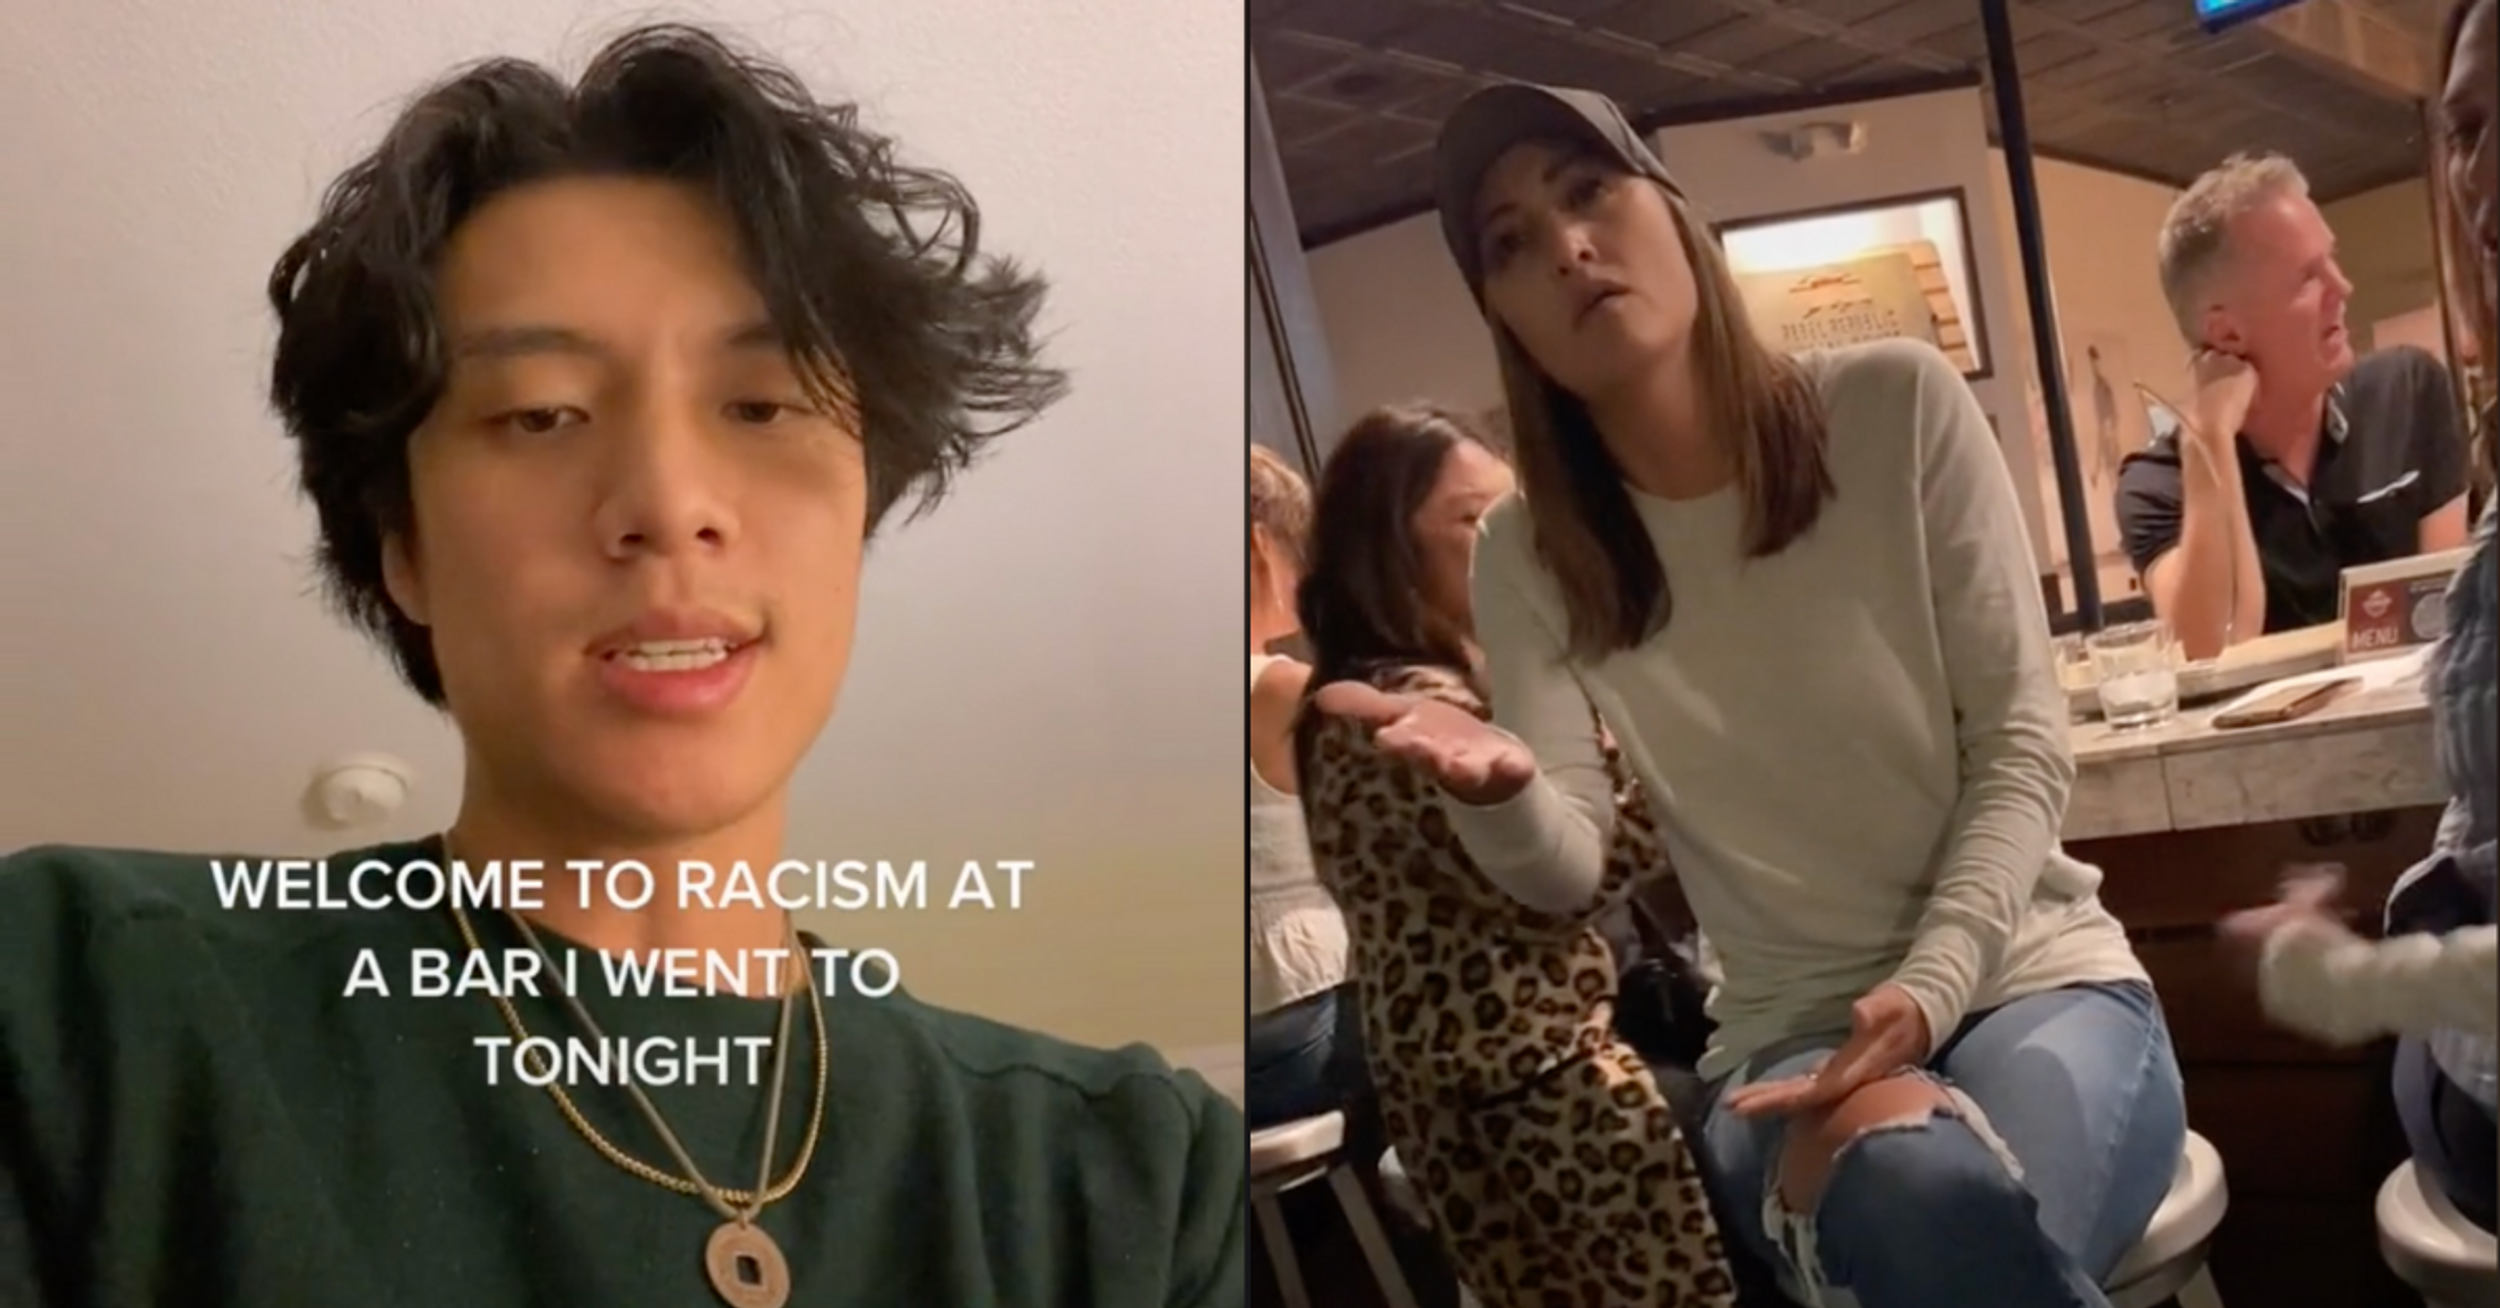 Woman Tells Asian Man Anti-Asian Hate Doesn't Really Exist: 'I'm Over That Whole Narrative'